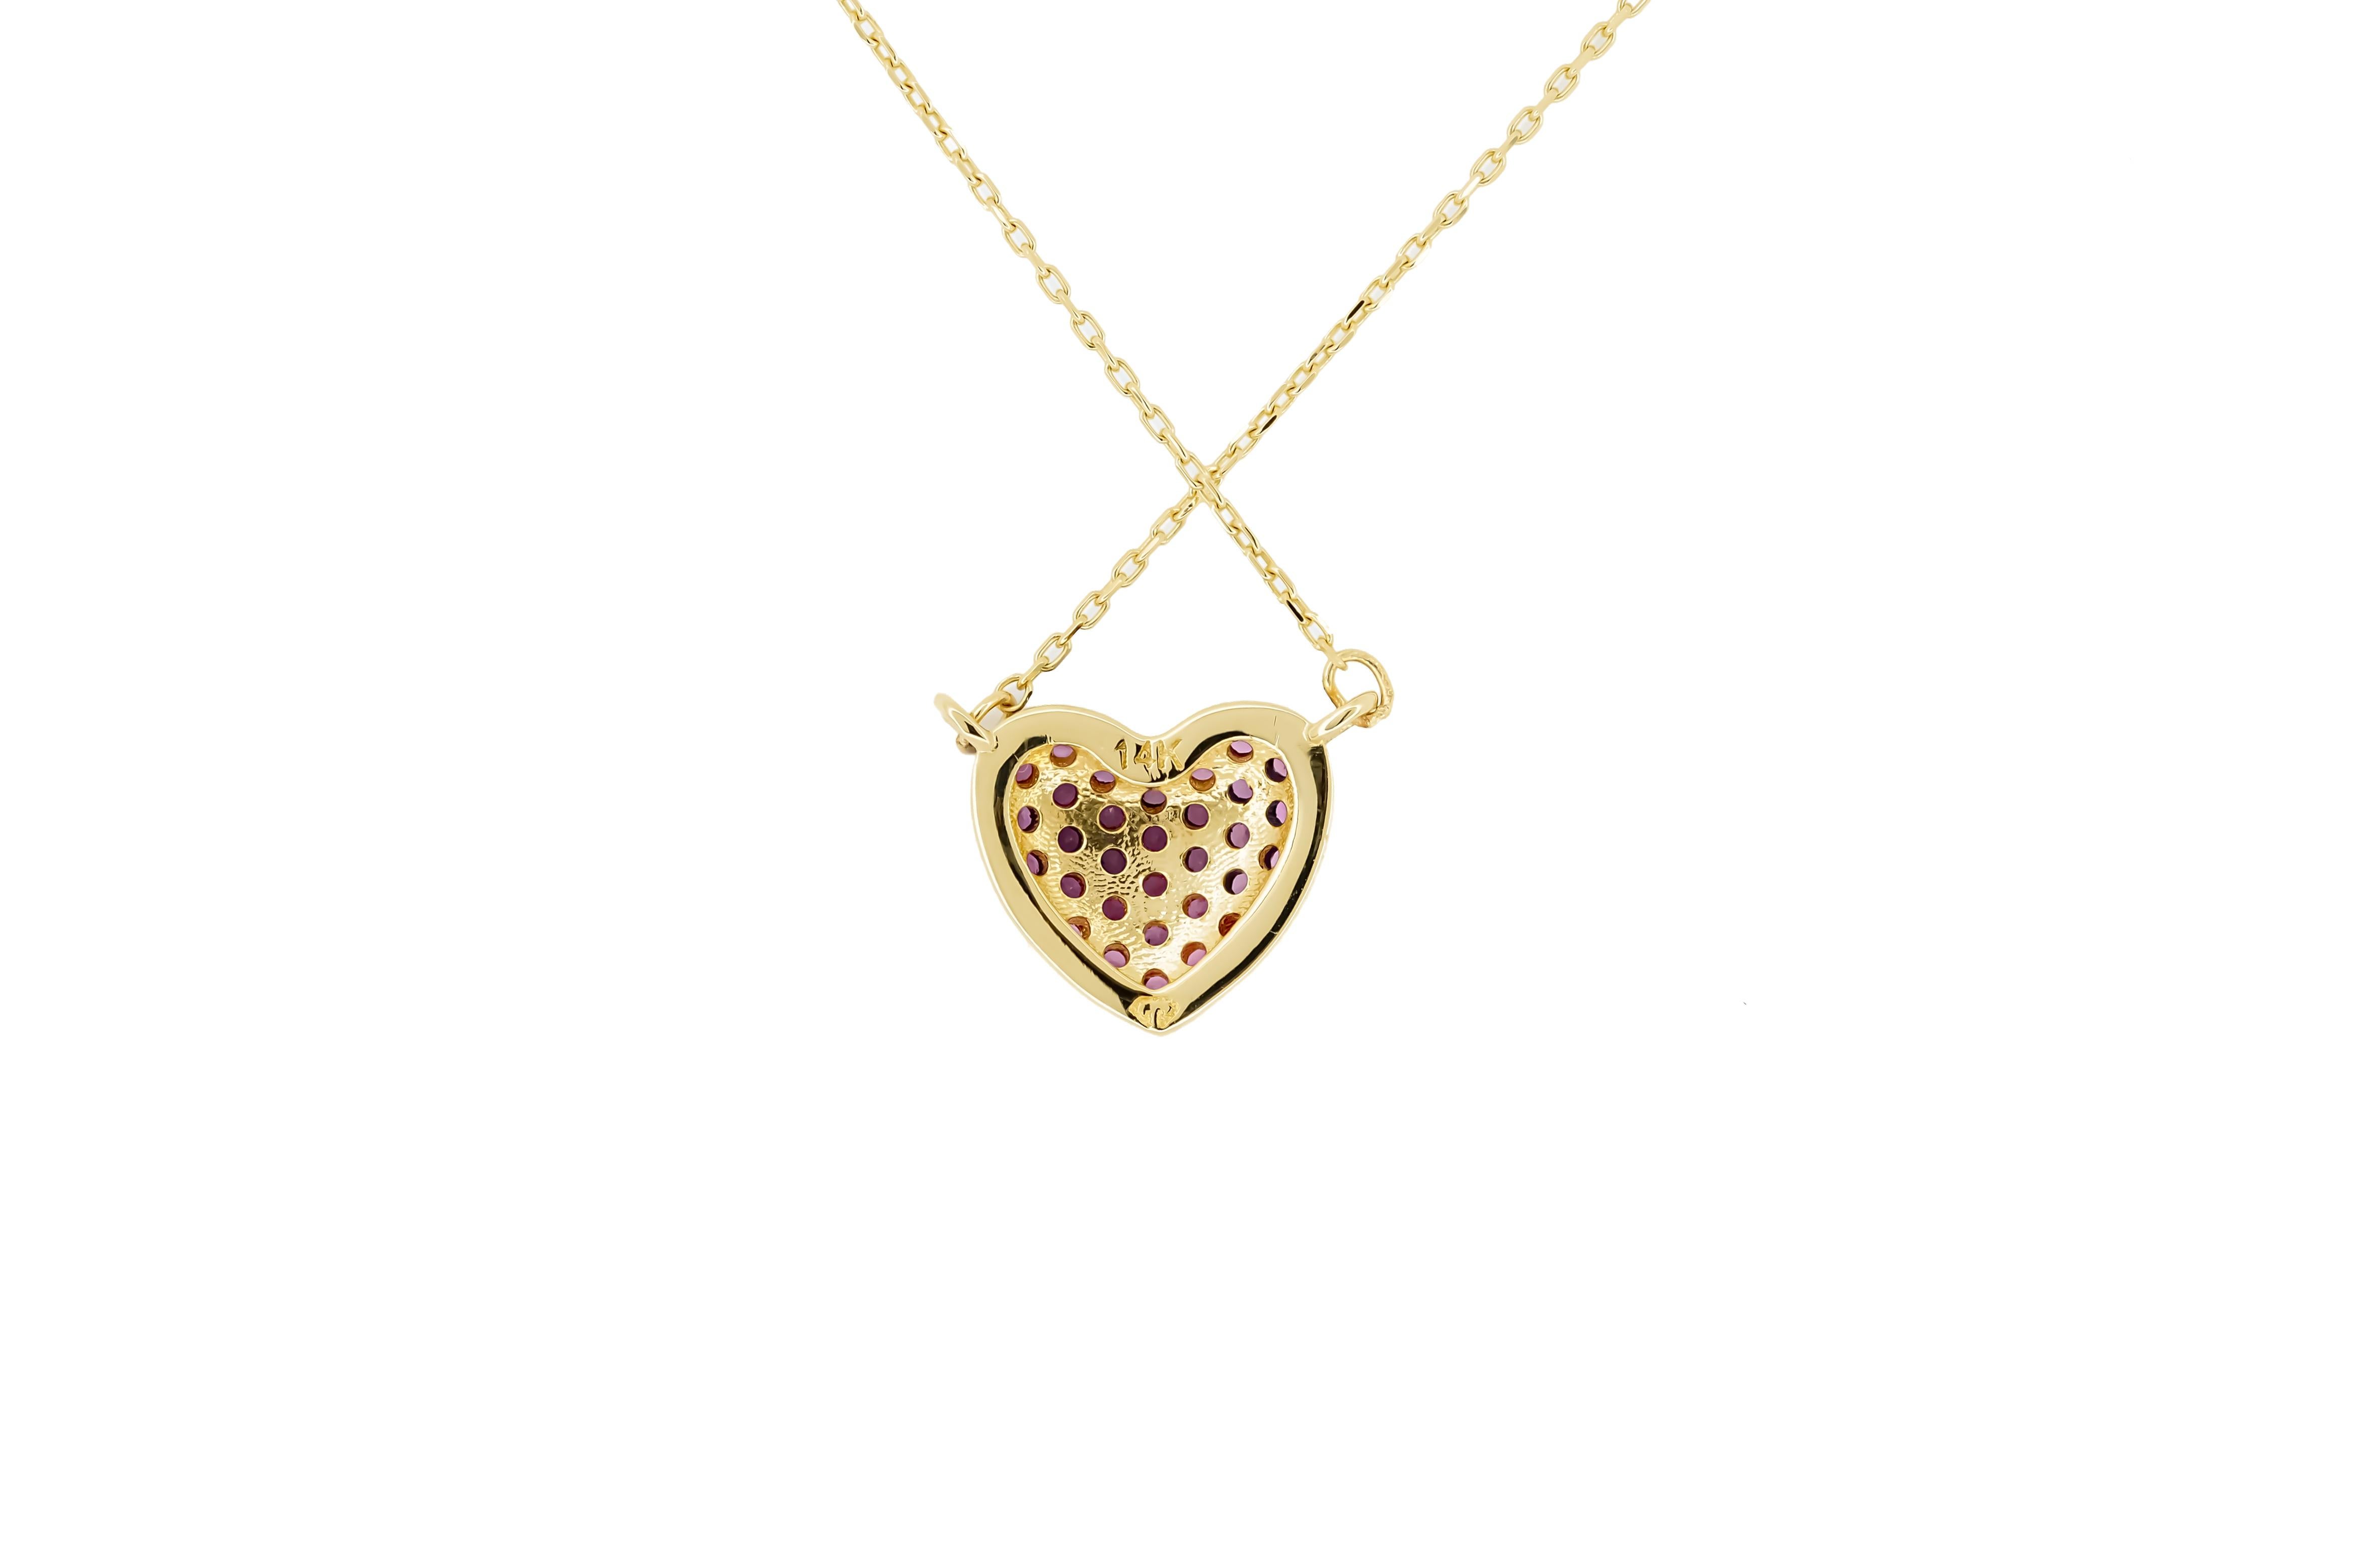 14k Solid Gold heart Pendant necklace. Heart necklace for women. 1